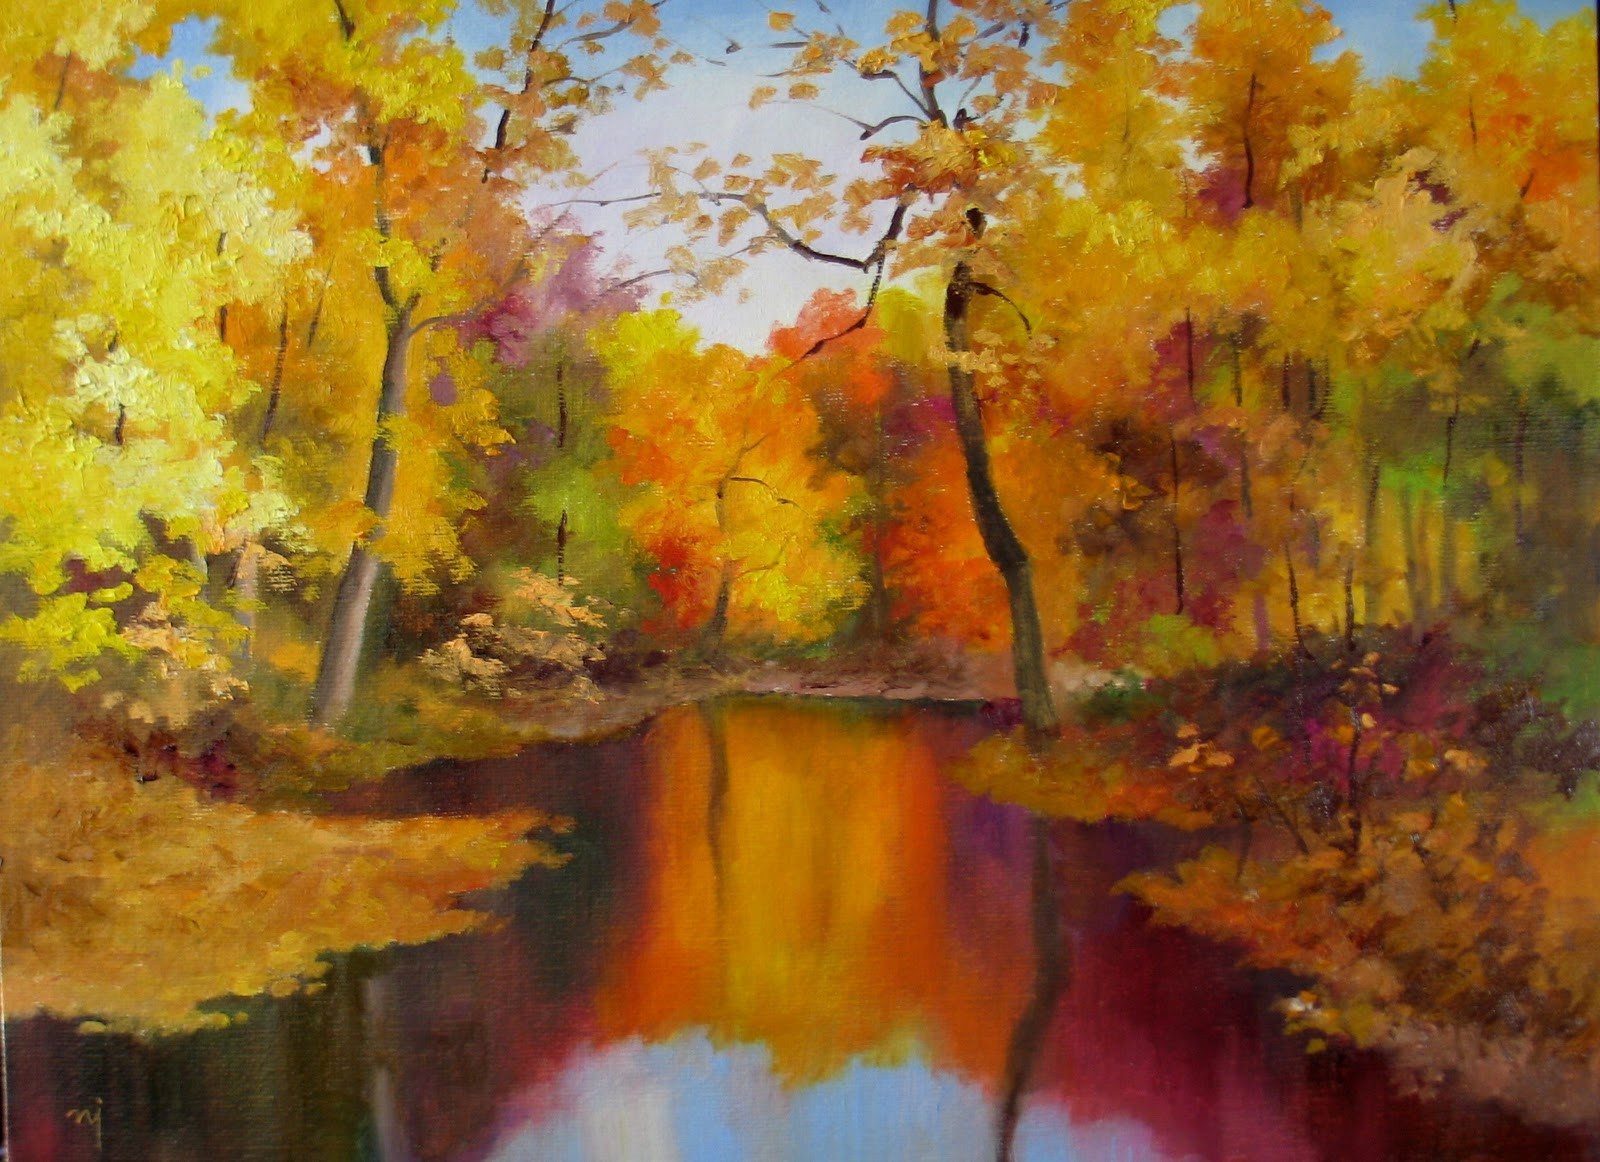 Fall Landscape Painting
 Nel s Everyday Painting Autumn Landscape 2 SOLD